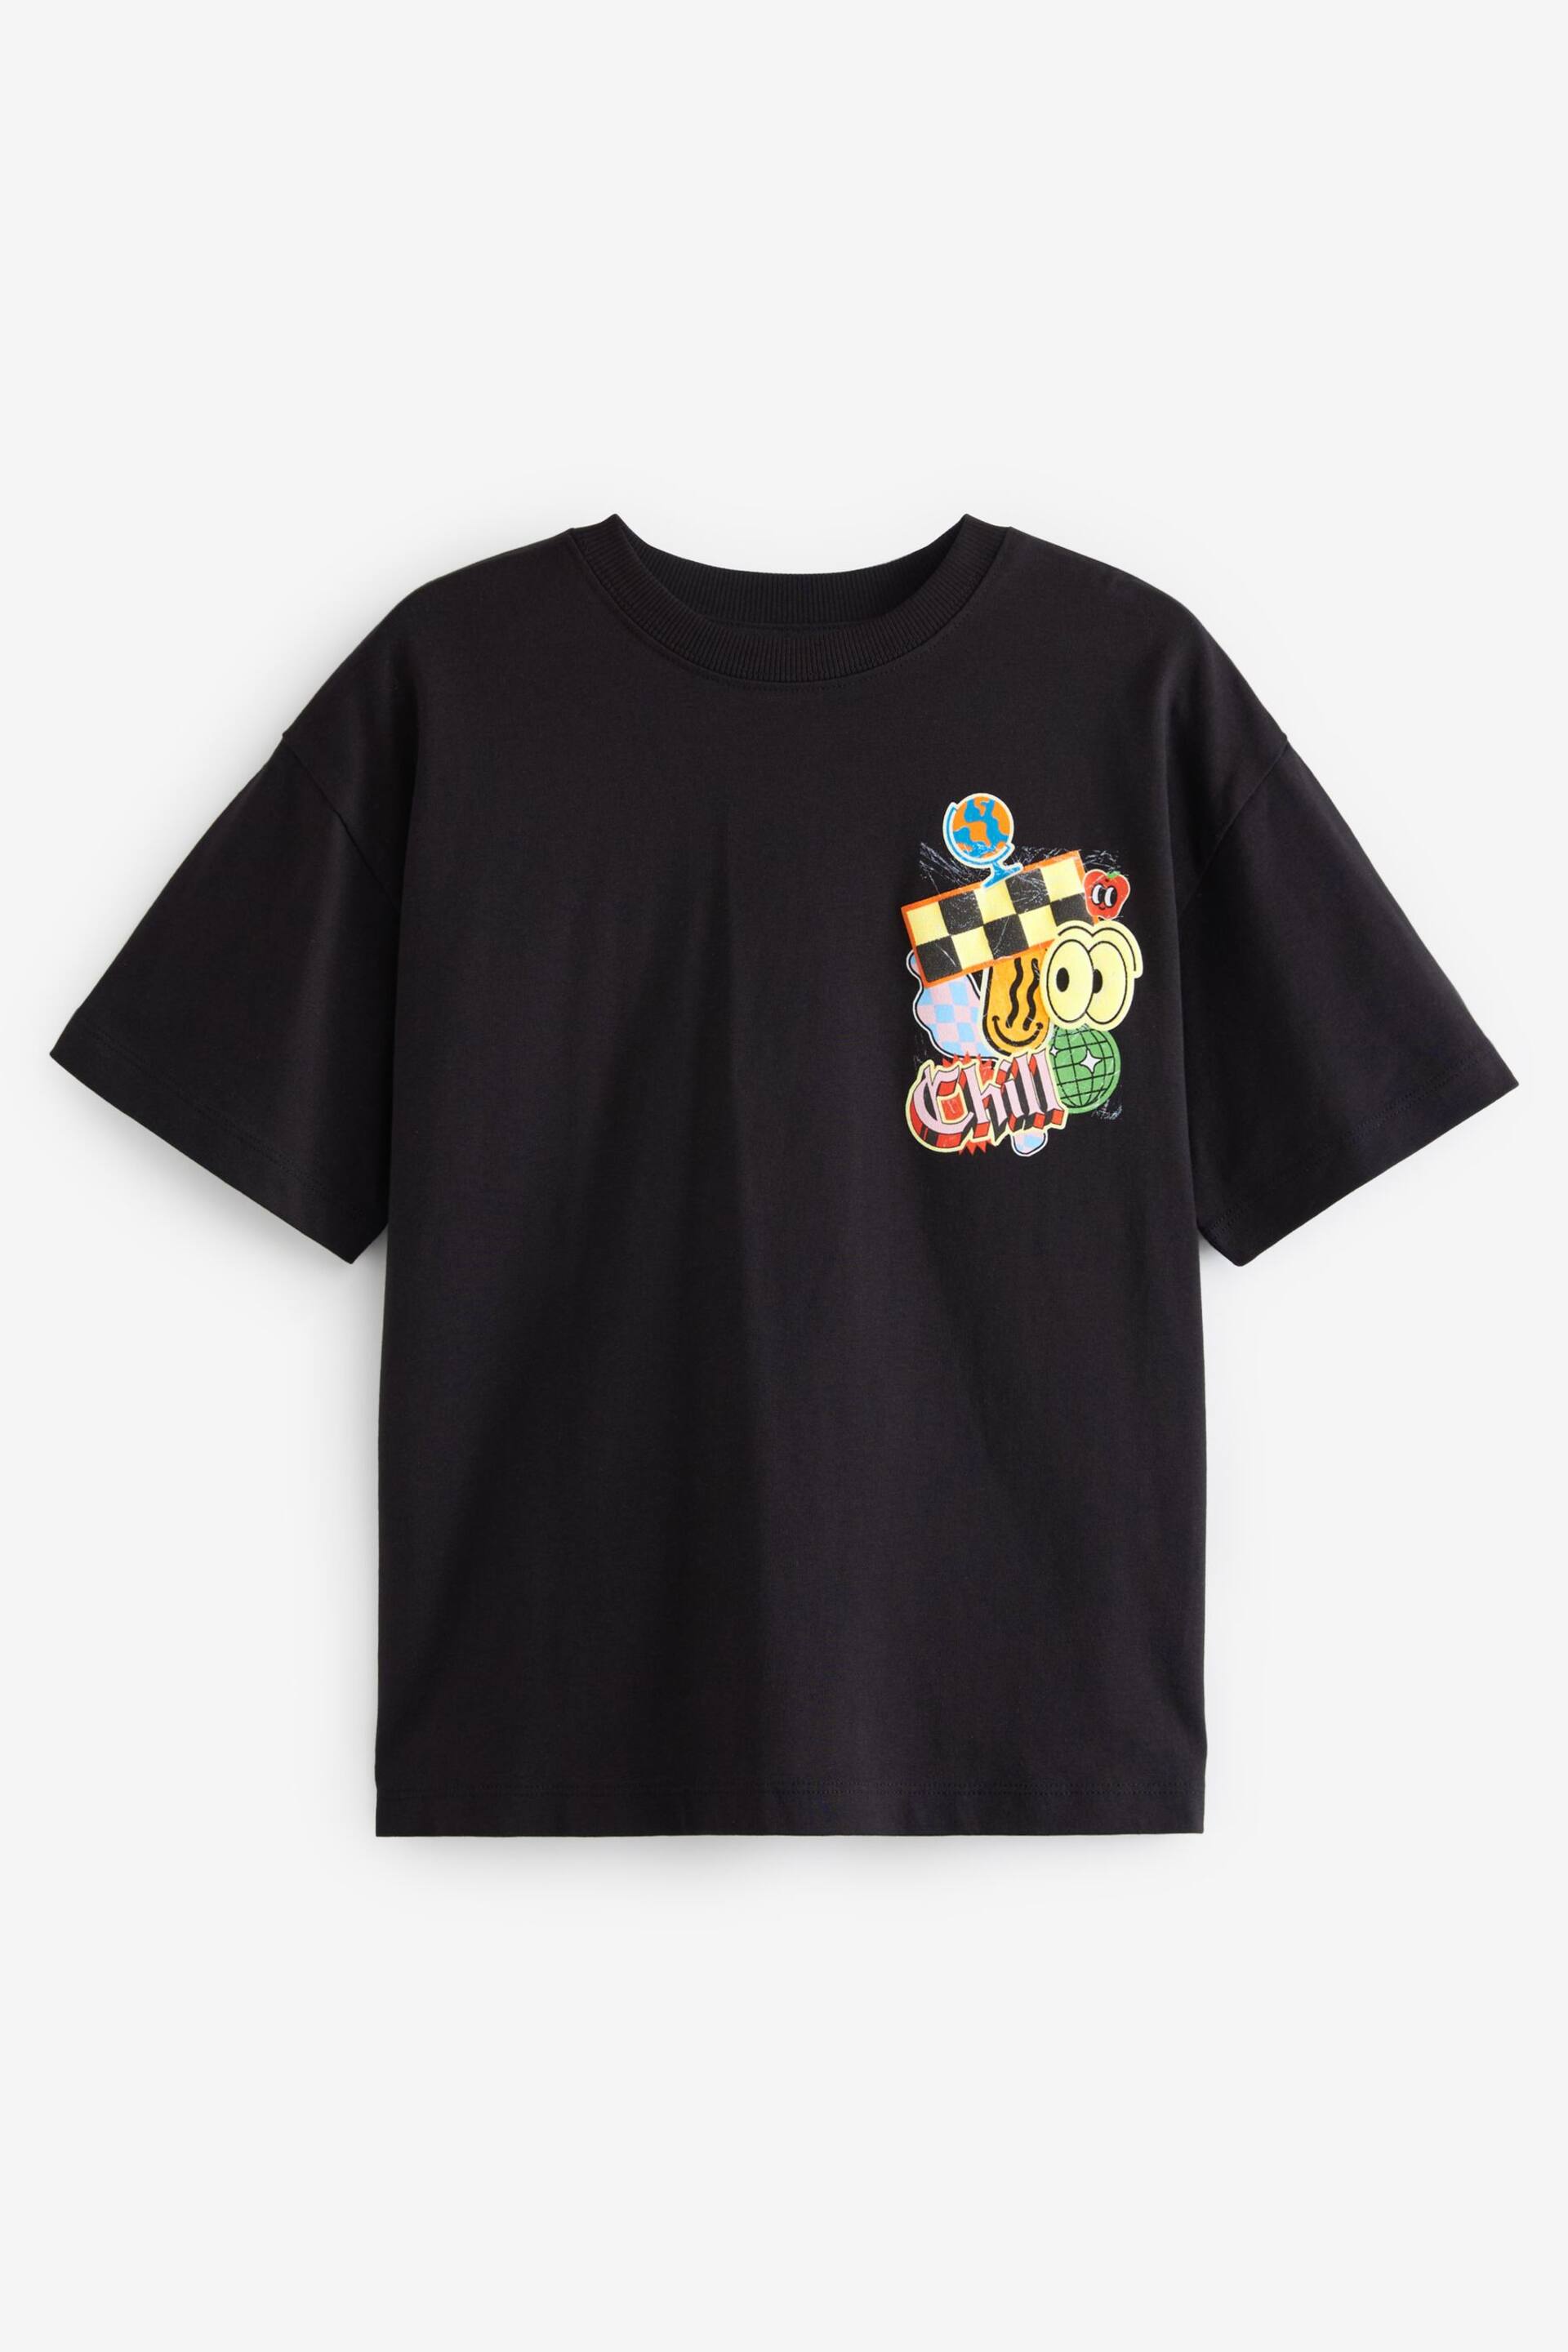 Black Stickers Oversized Fit Short Sleeve Graphic T-Shirt (3-16yrs) - Image 1 of 3